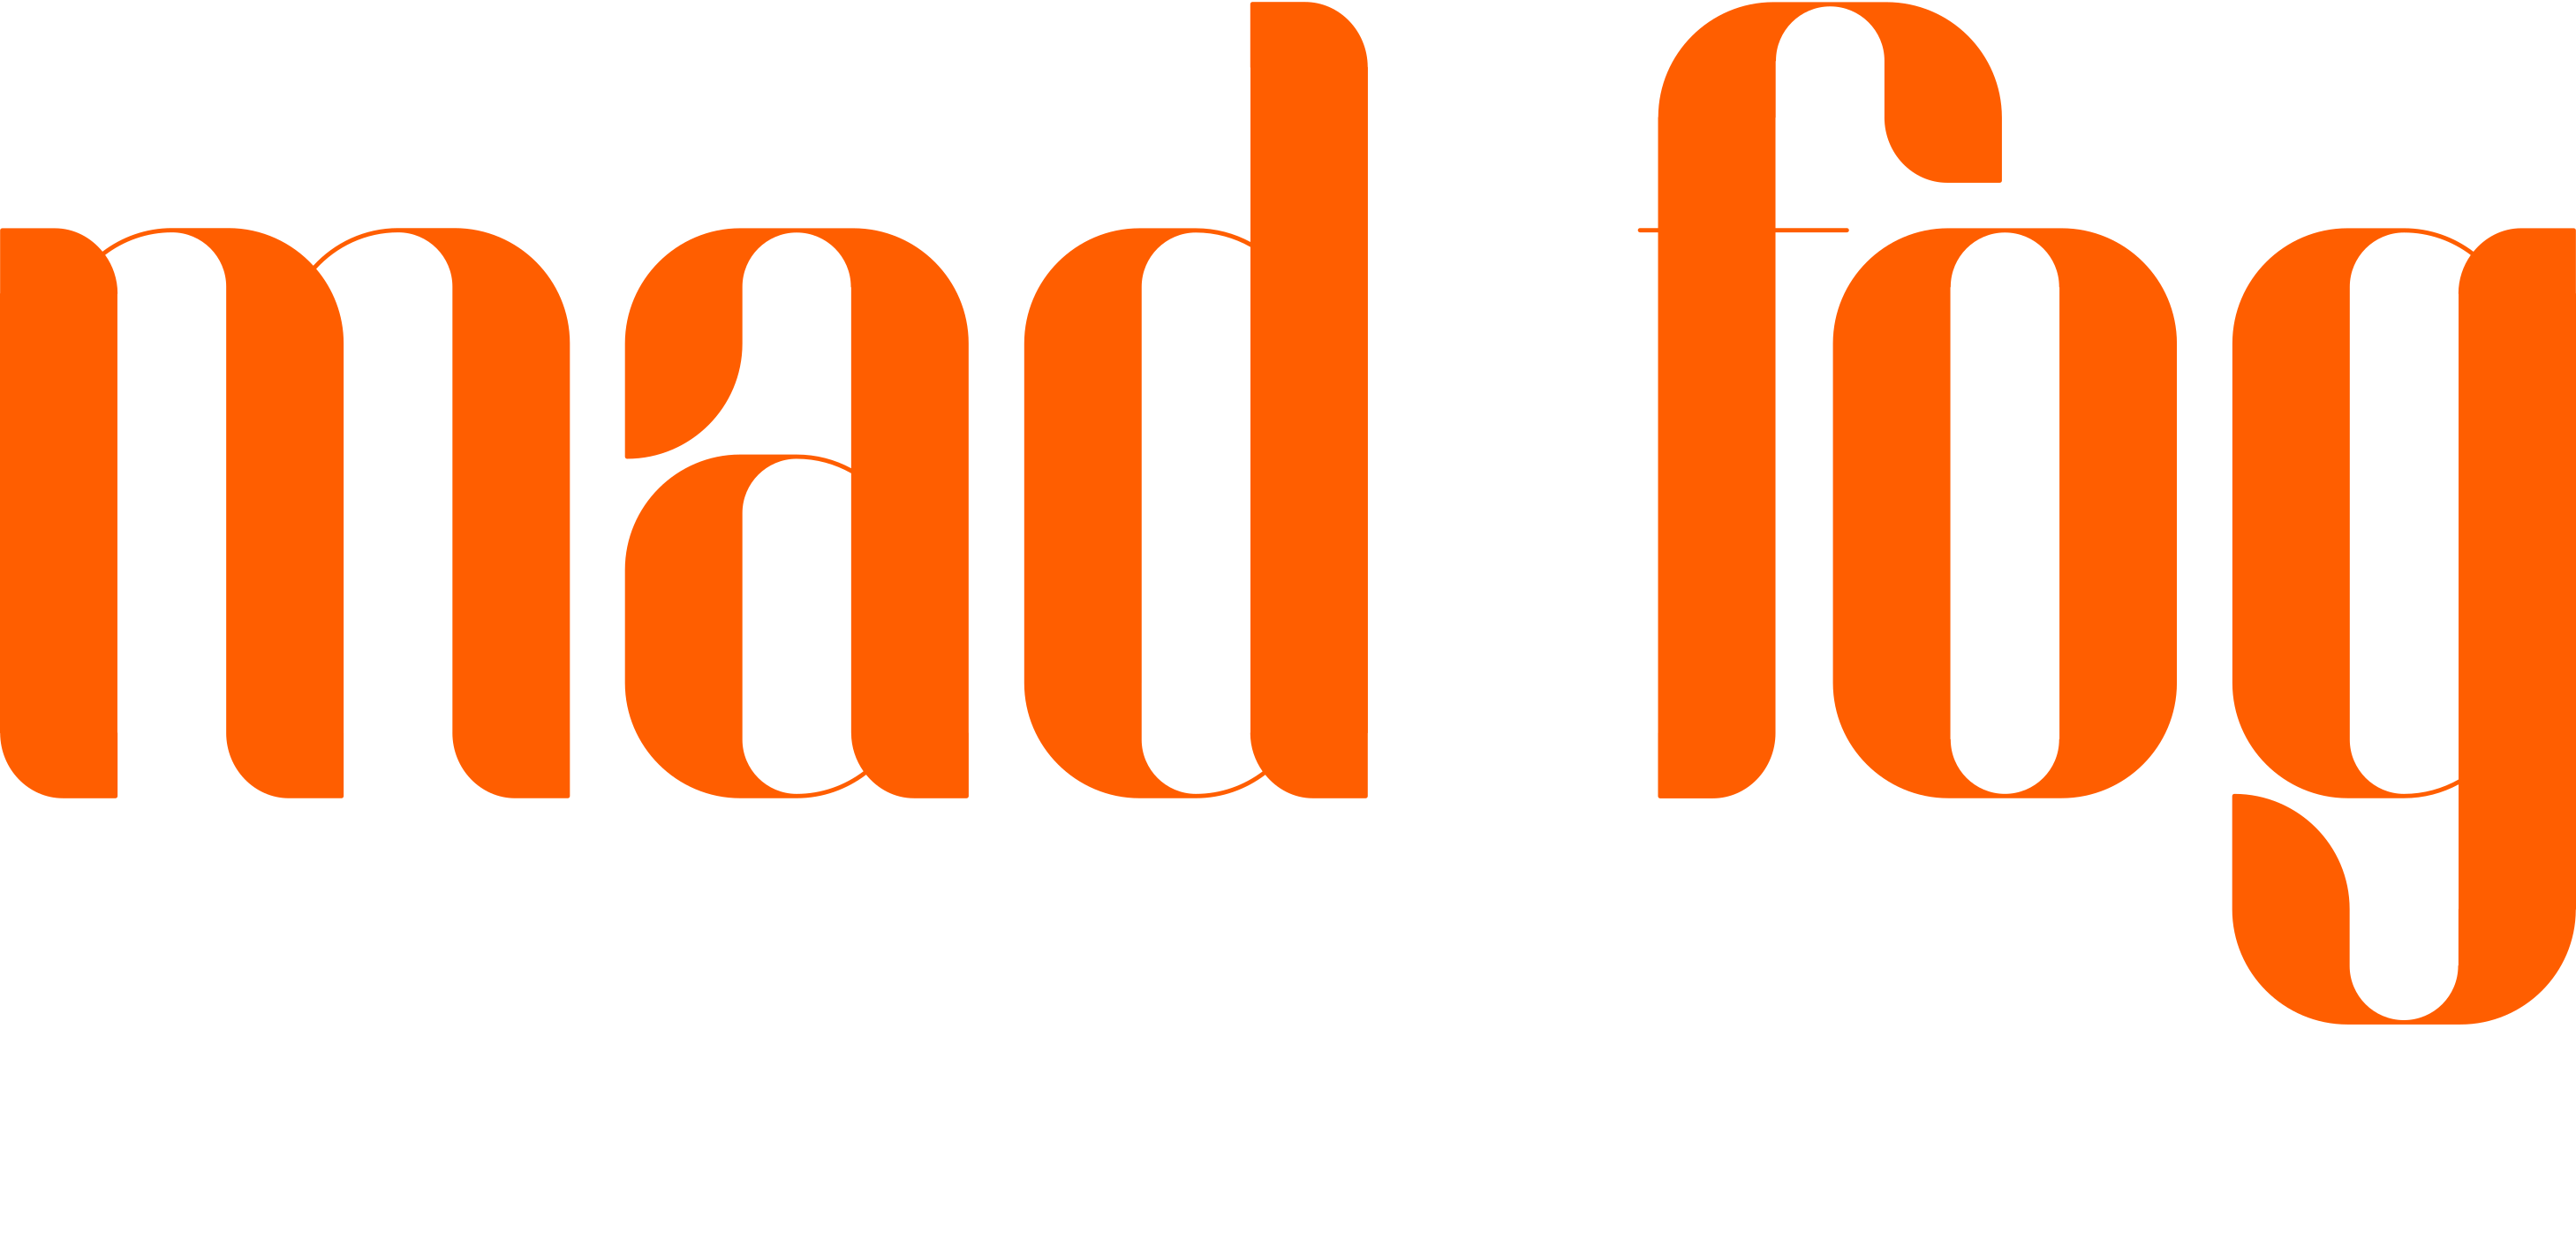 mad fog vape shop, new westminster written in orange with white background